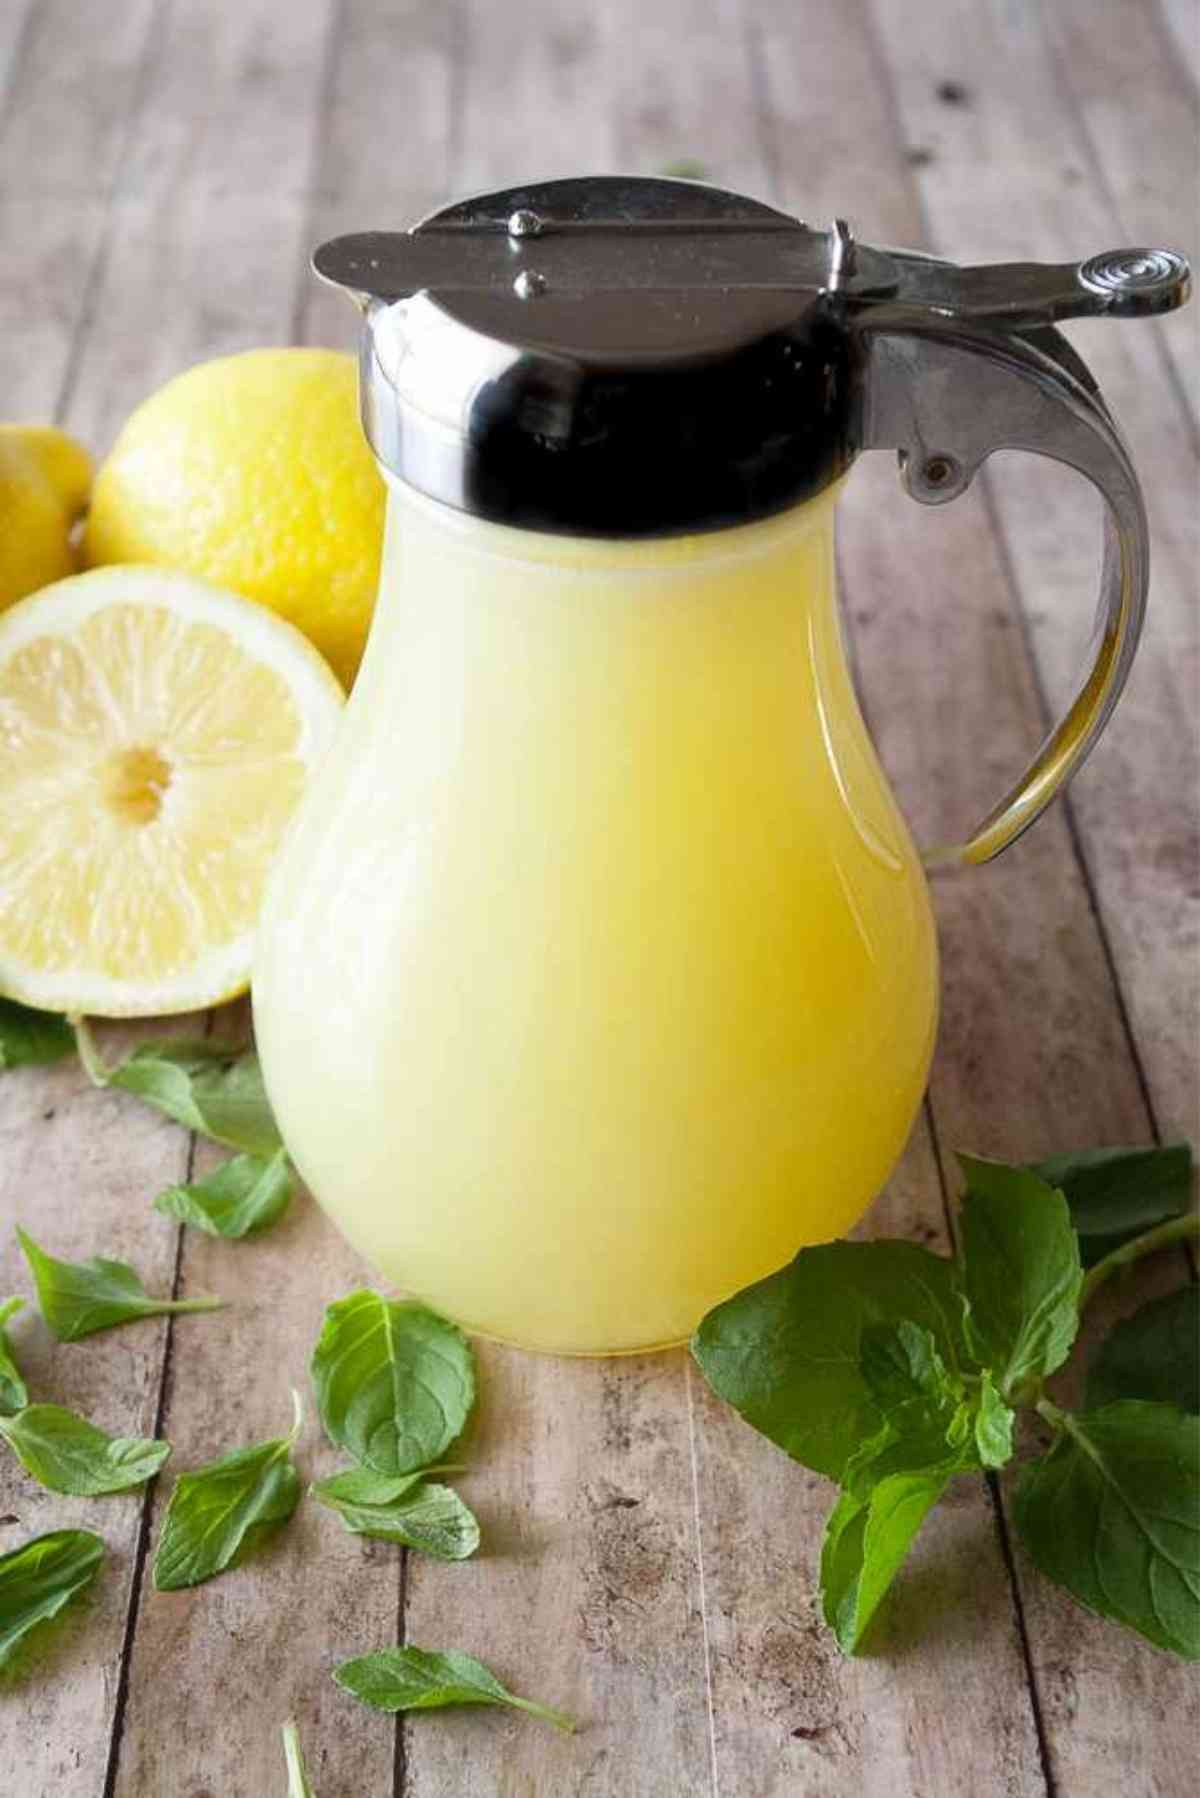 Bottle of this sweet, creamy citrus syrup!